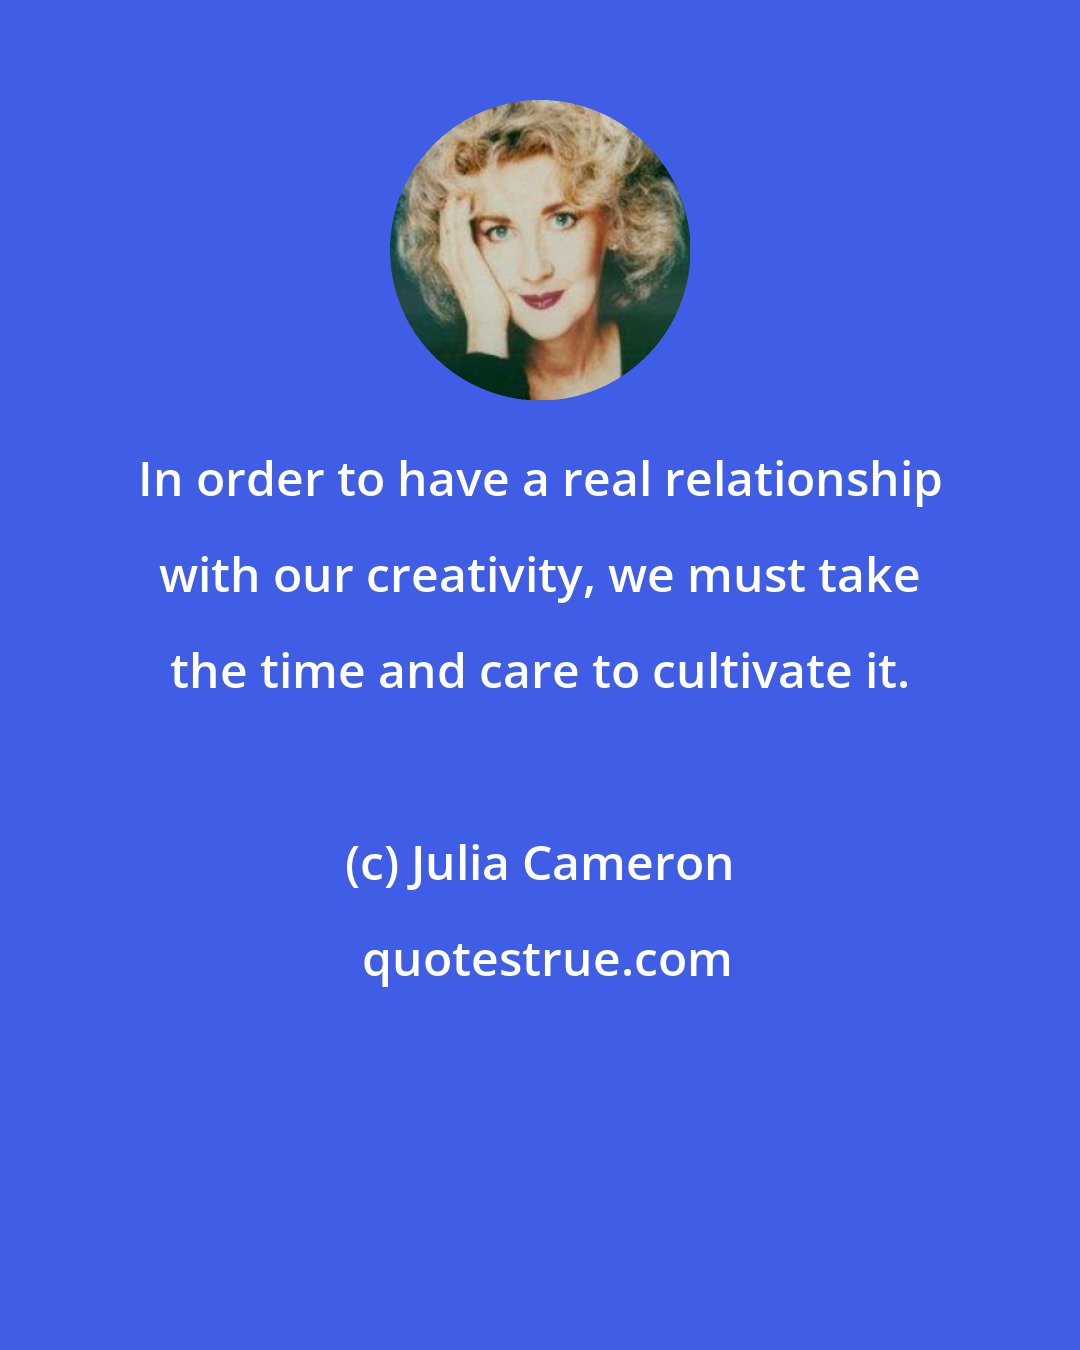 Julia Cameron: In order to have a real relationship with our creativity, we must take the time and care to cultivate it.